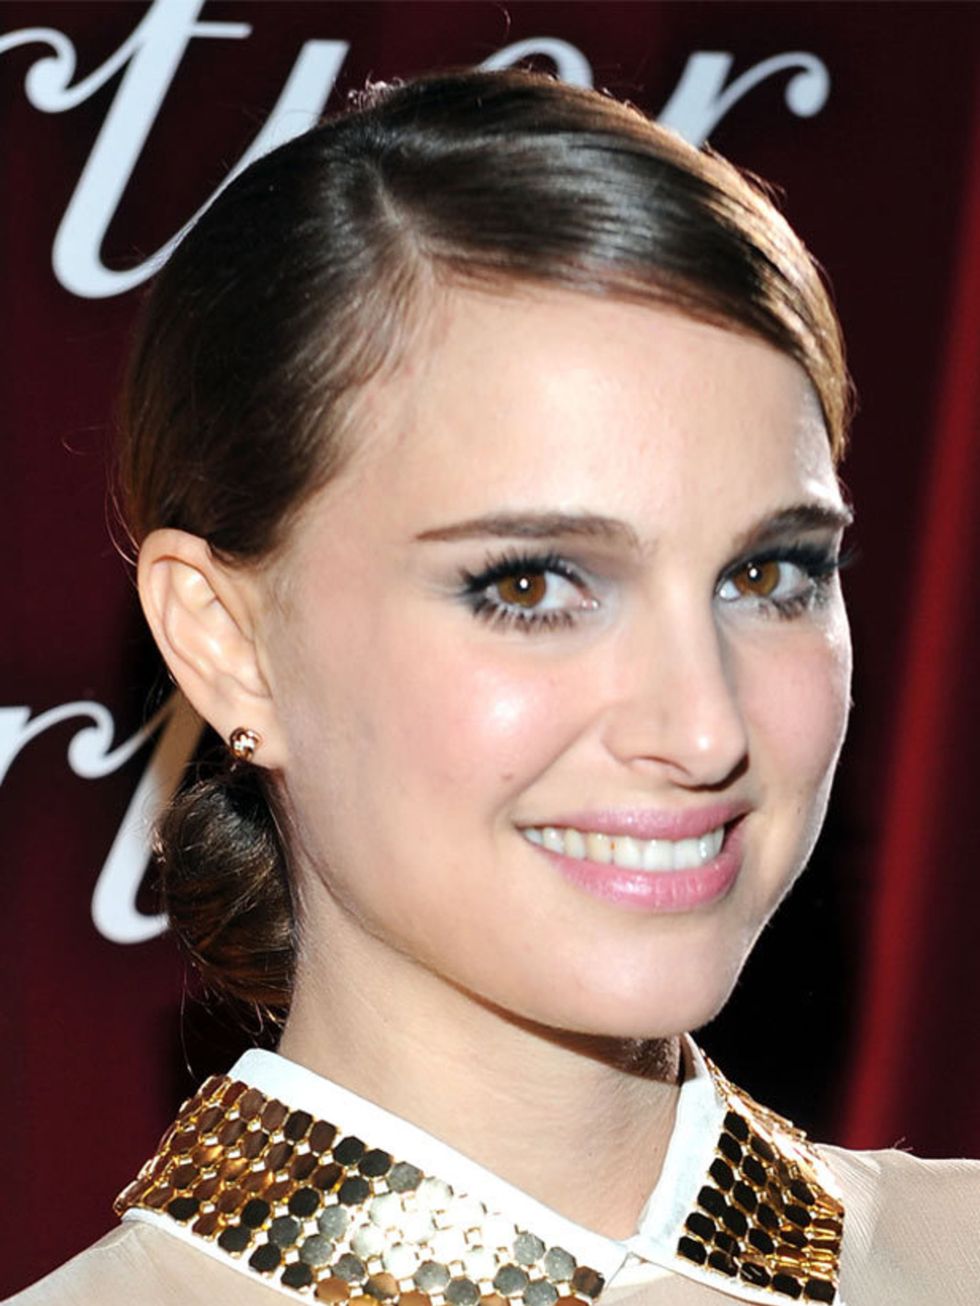 <p><a href="http://www.elleuk.com/starstyle/style-files/%28section%29/Natalie-Portman/">See Natalie's Style CV...</a></p>